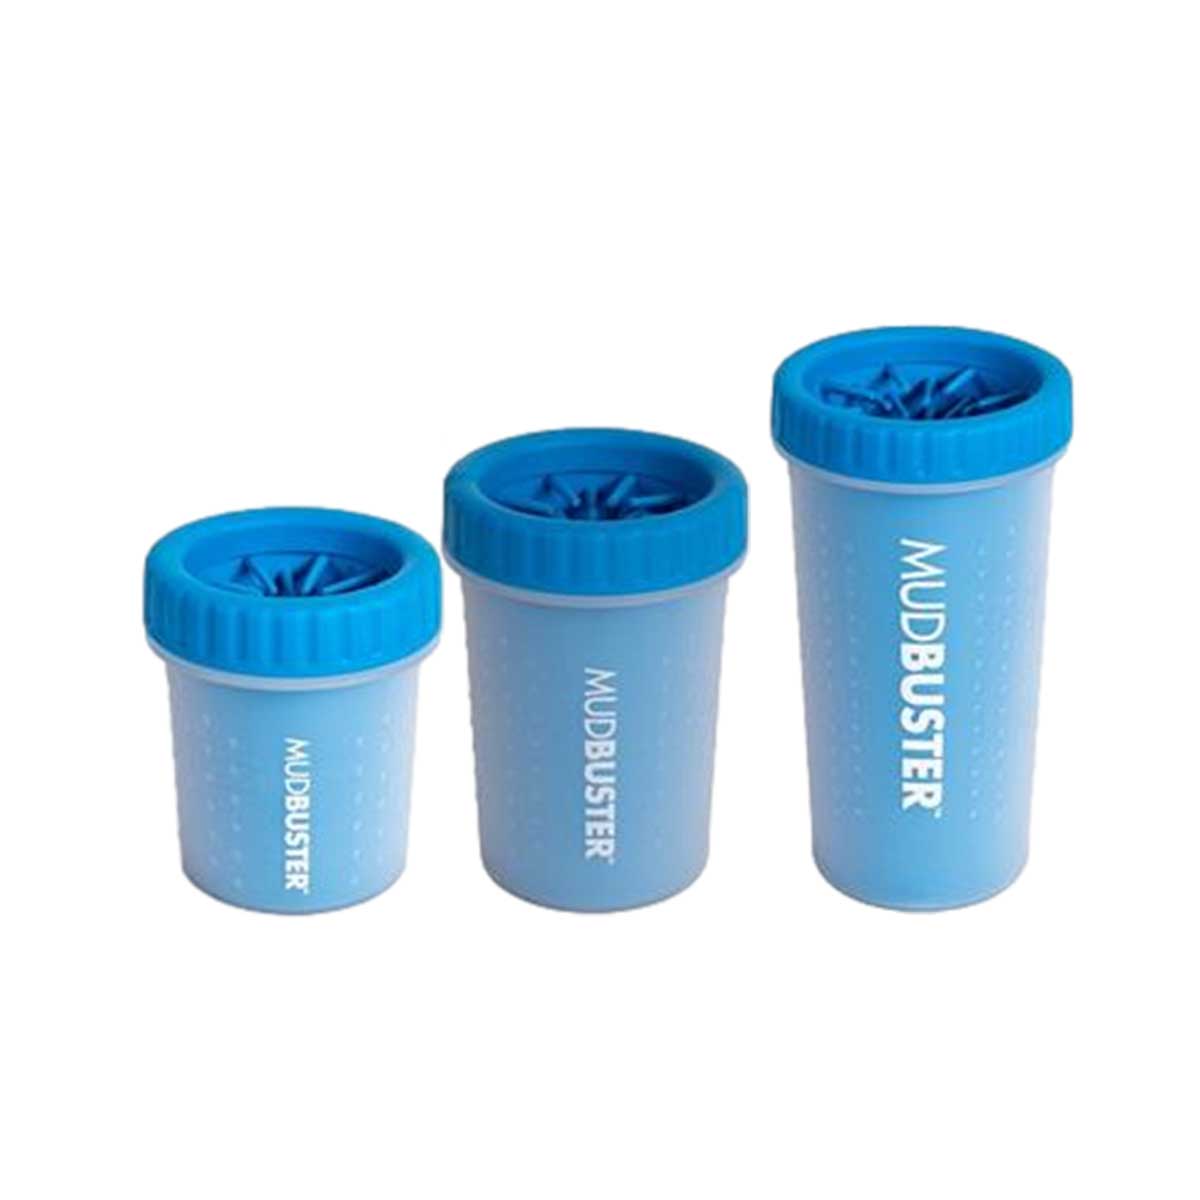 Dexas MudBuster® Portable Paw Washer in Blue | Pawlicious & Company